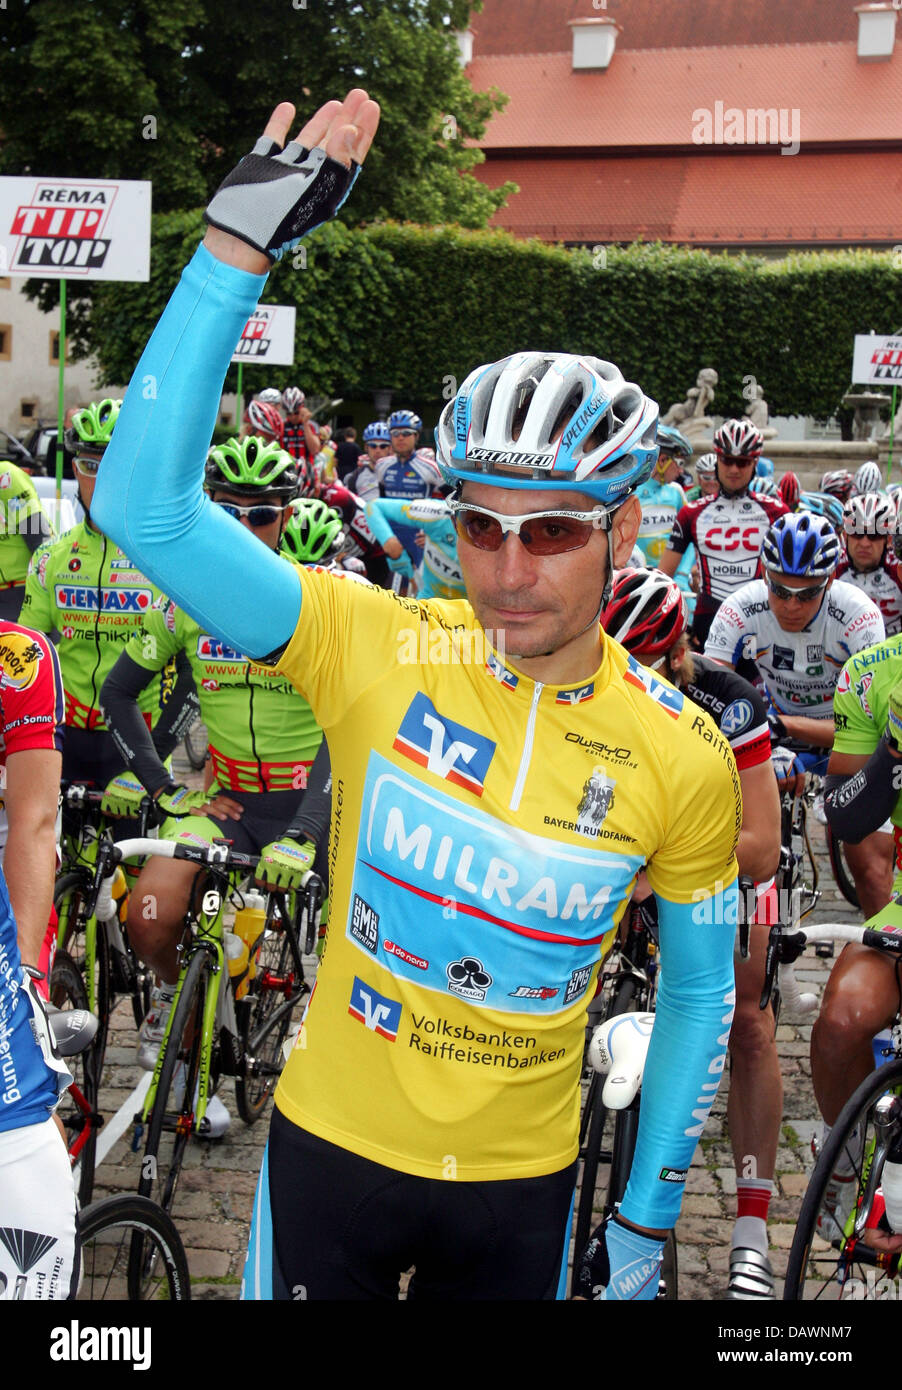 German cyclist Erik Zabel of Team Milram waves to his fans while wearing the yellow jersey, as overall leader of the race, during the third stage of the 'Bavaria-tour' (Bayern-Rundfahrt) in Eichstaett, Germany, 01 June 2007. The third stage ends in Kitzingen after 181.1 kilometres. Photo: Gero Breloer Stock Photo